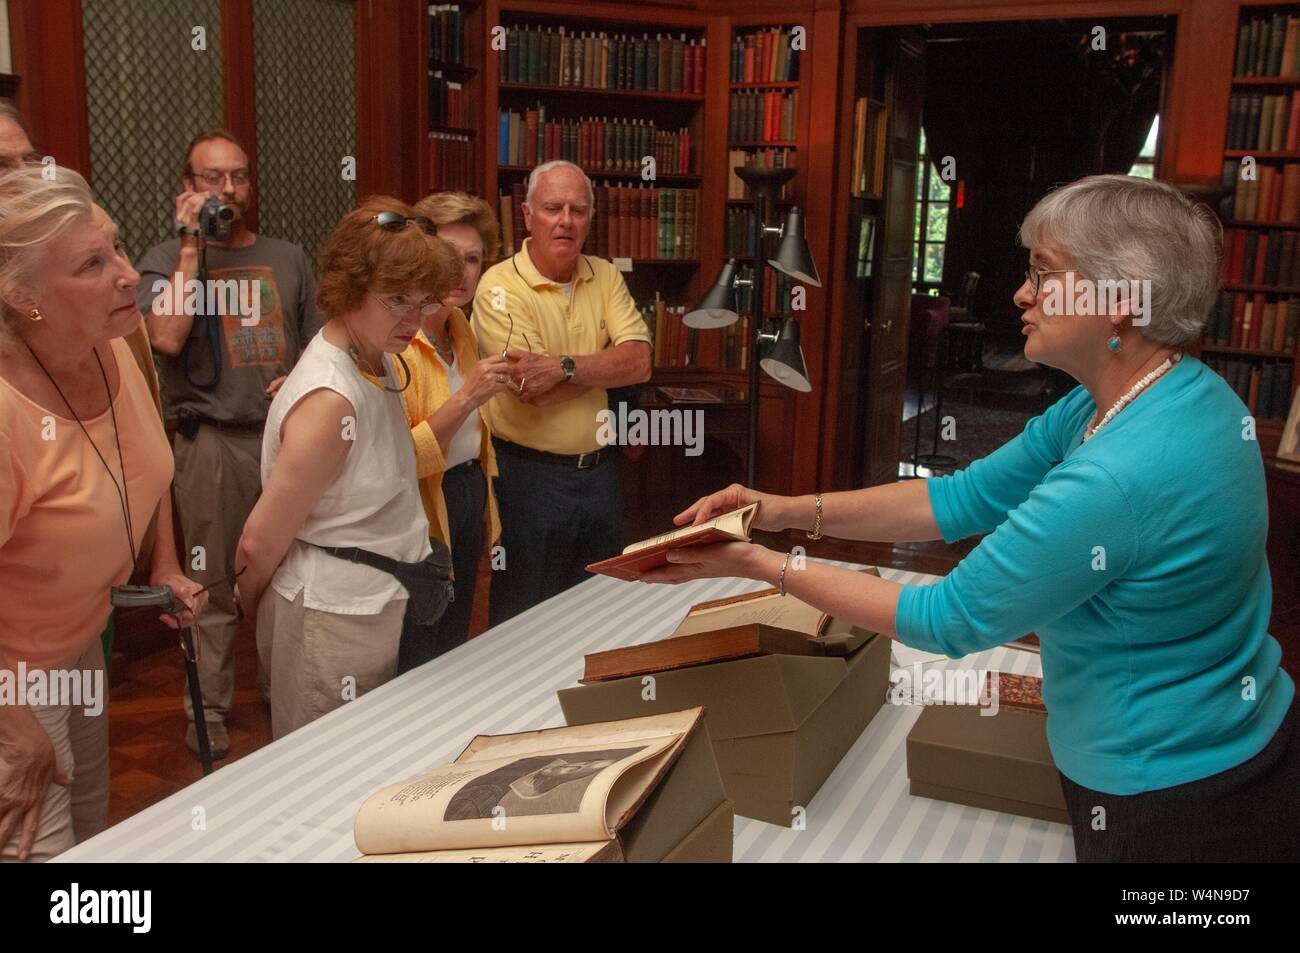 A staff member exhibits antique books, including a 1685 copy of Shakespeare's plays, from the Milton S Eisenhower Library's collection, at the Johns Hopkins University, Baltimore, Maryland, July 23, 2006. From the Homewood Photography Collection. () Stock Photo